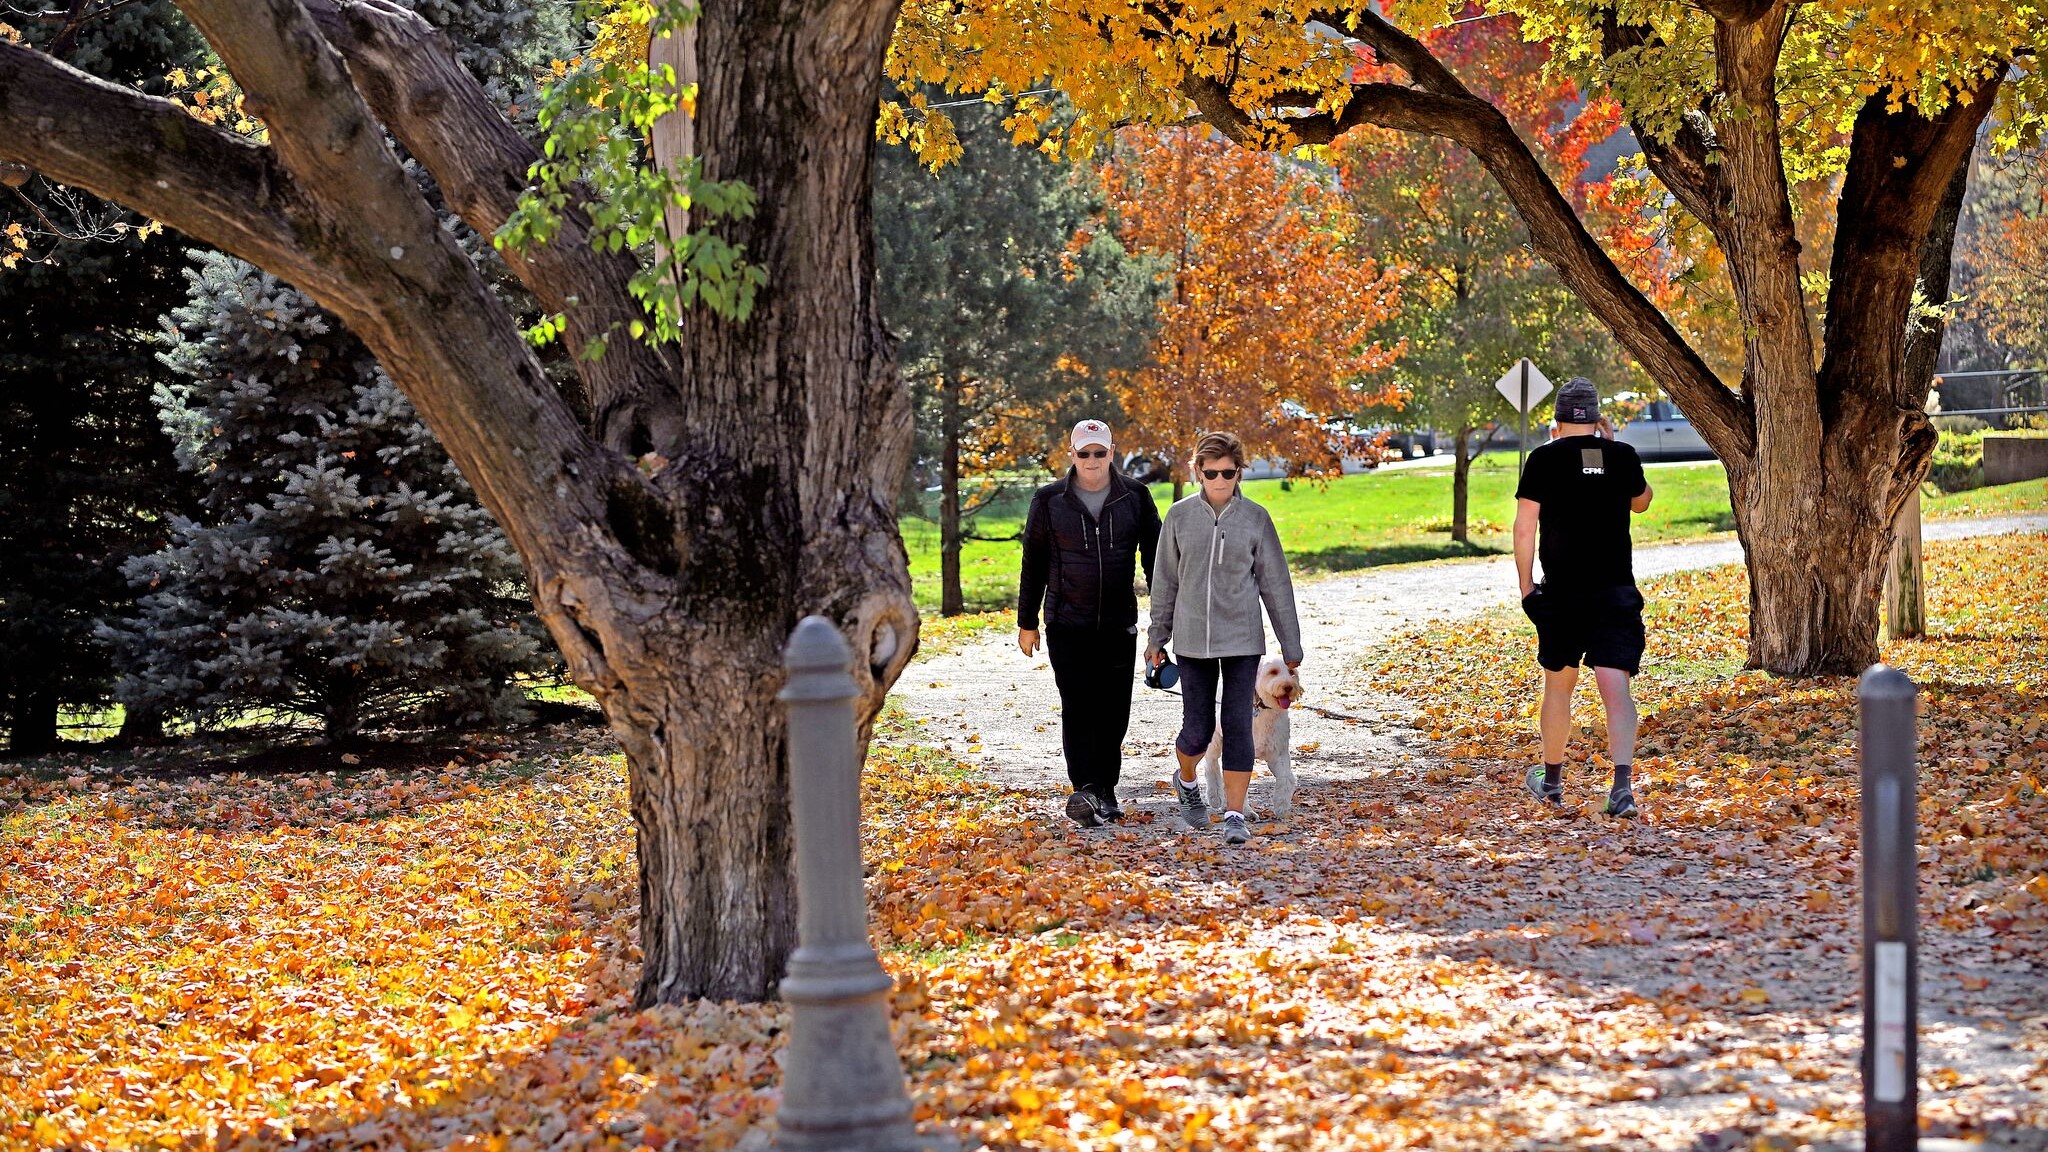 Seniors walking in the park in the fall